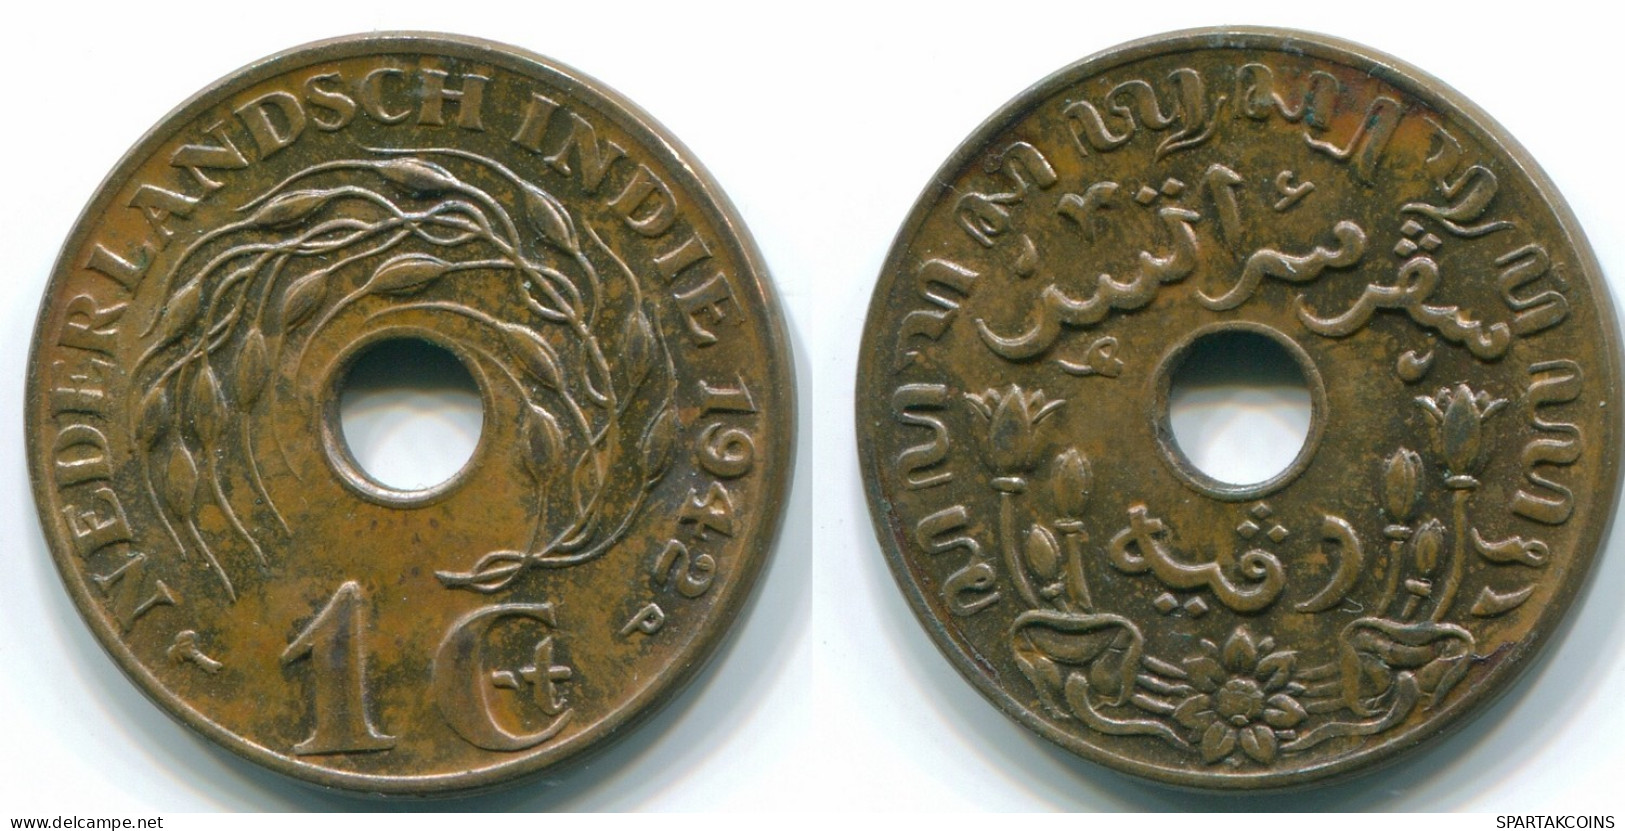 1 CENT 1942 NETHERLANDS EAST INDIES INDONESIA Bronze Colonial Coin #S10293.U.A - Dutch East Indies